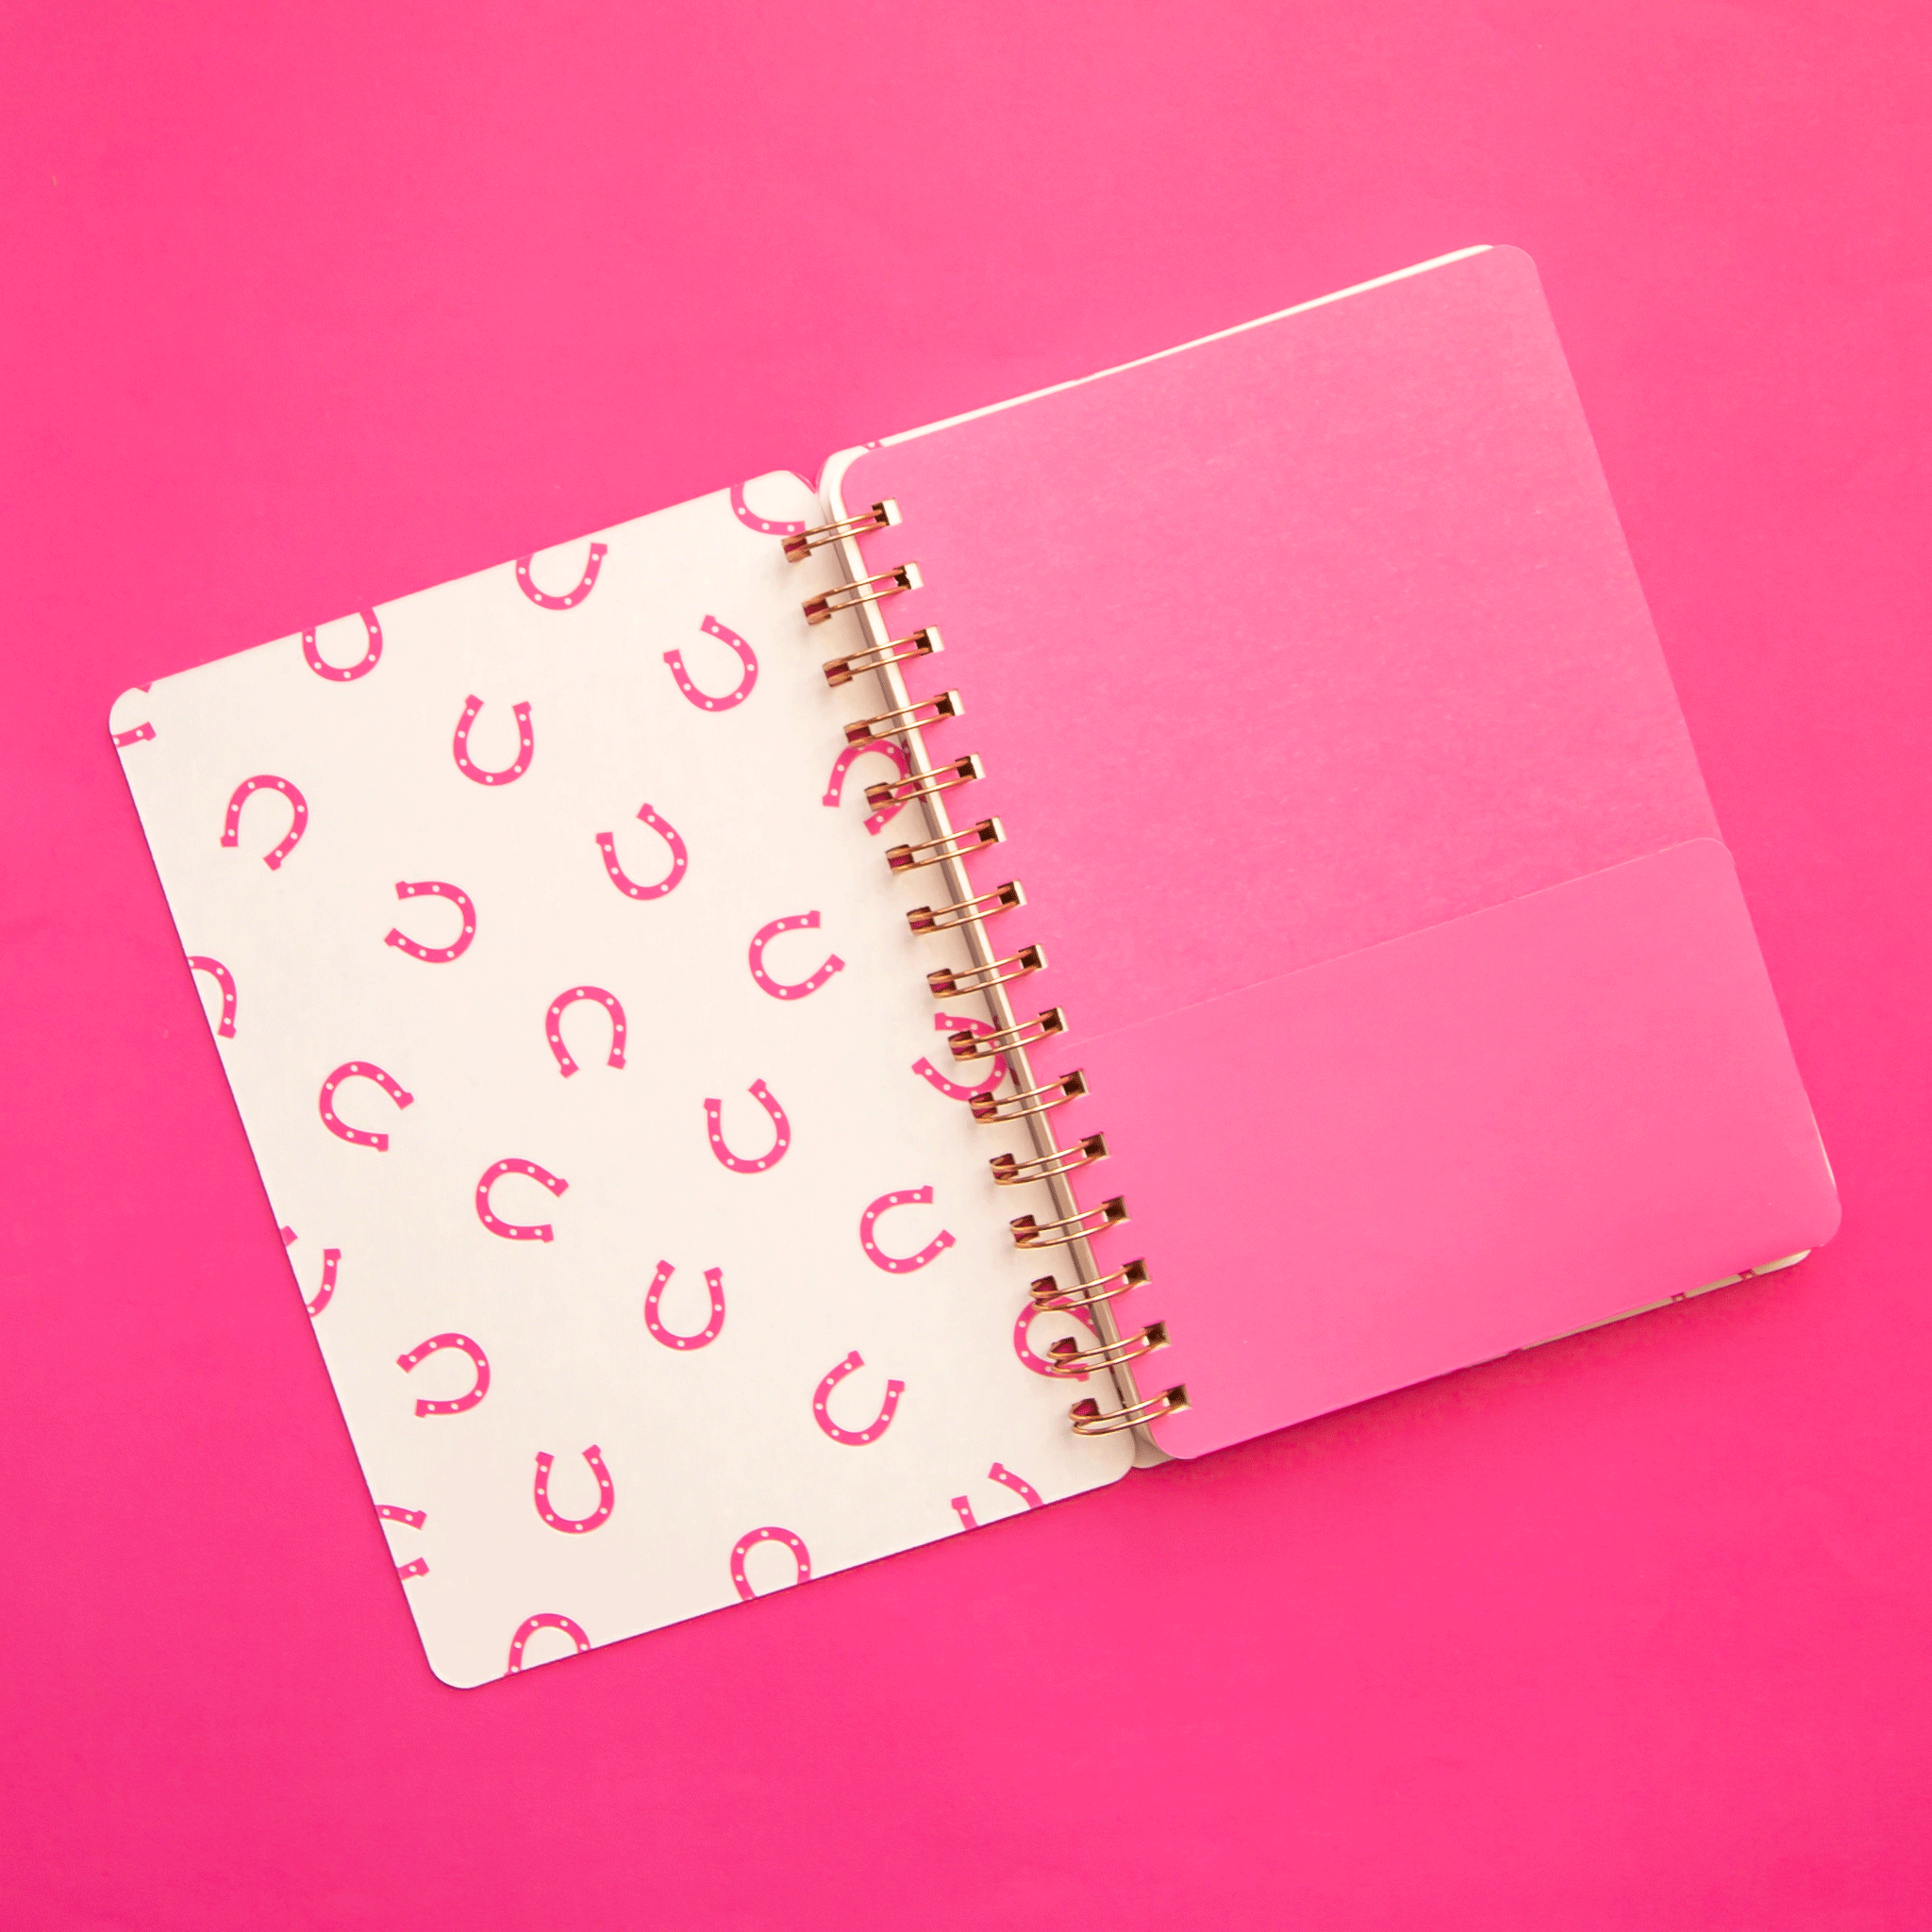 On a pink background is a hot pink spiral bound notebook with a soft cover and text in the center that reads, "Howdy" along with a pink and white horseshoe print on the inside cover.